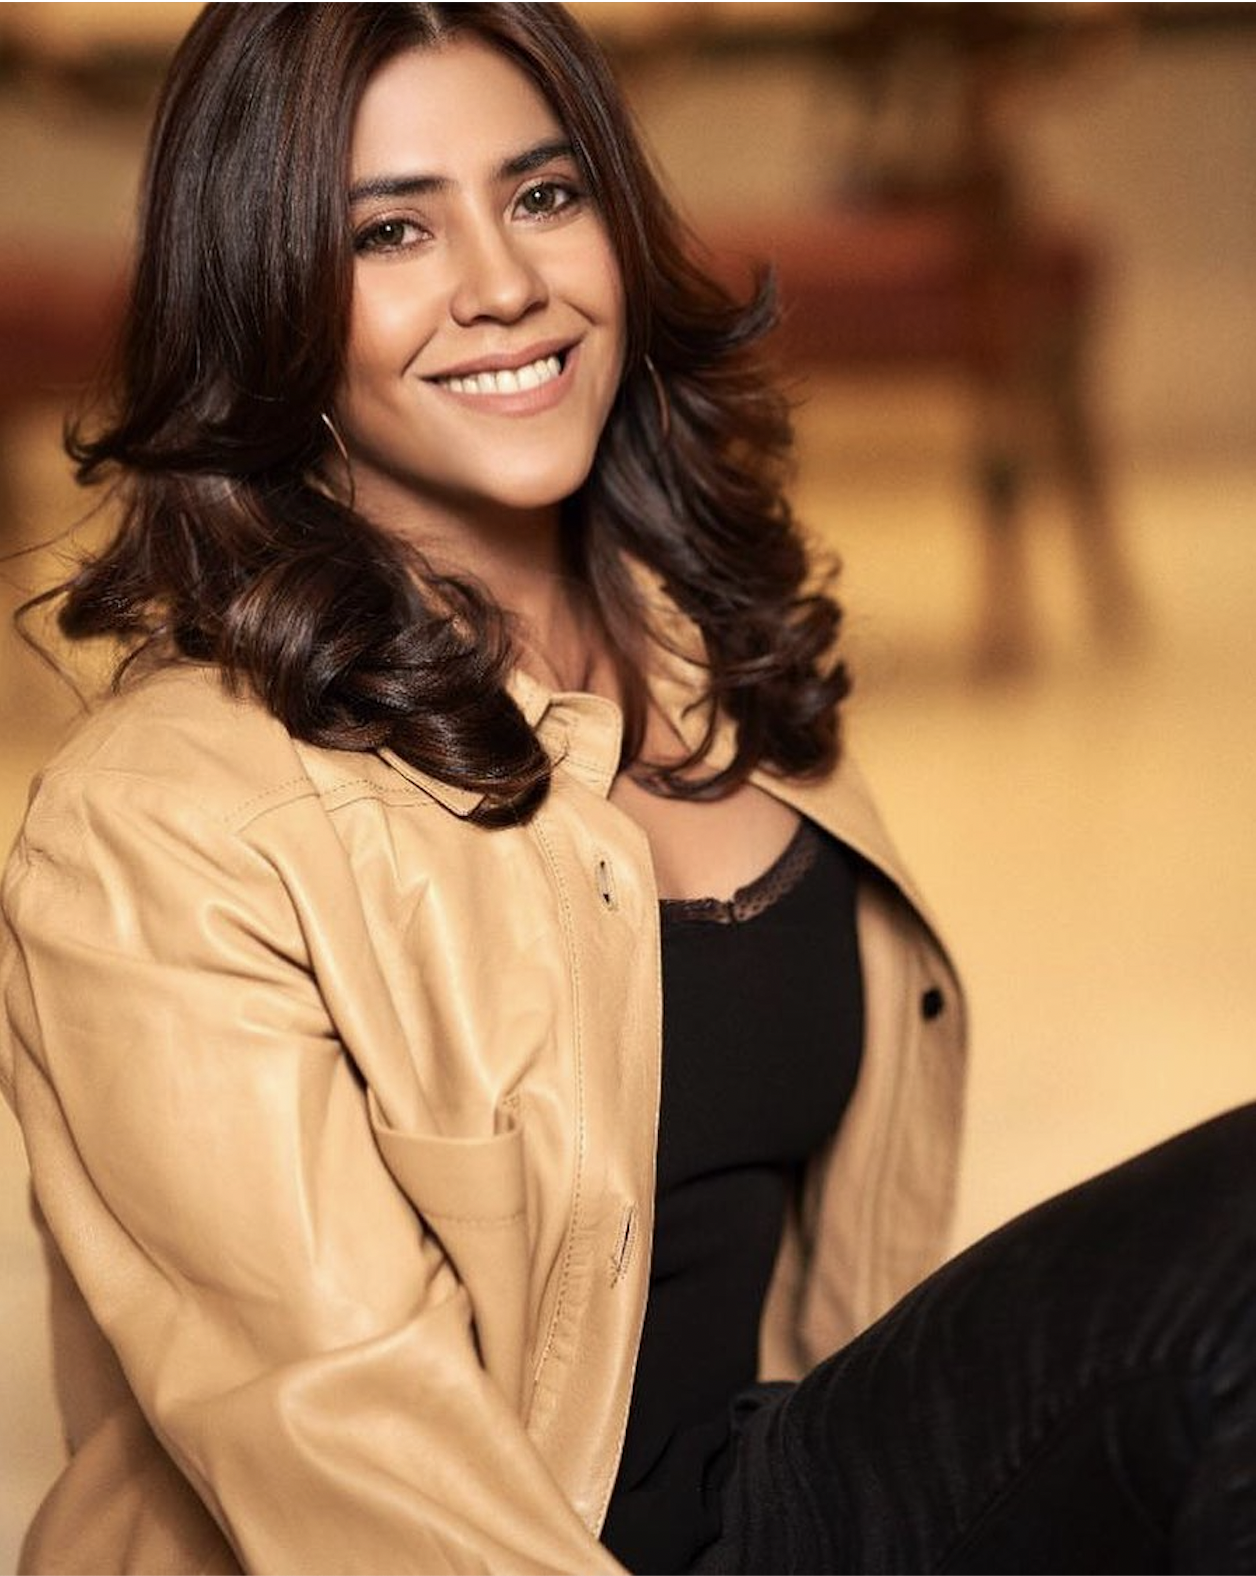 Ekta Kapoor is a television and film producer and the joint managing director and creative head of Balaji Telefilms Limited. Photo: @ektarkapoor/Instagram